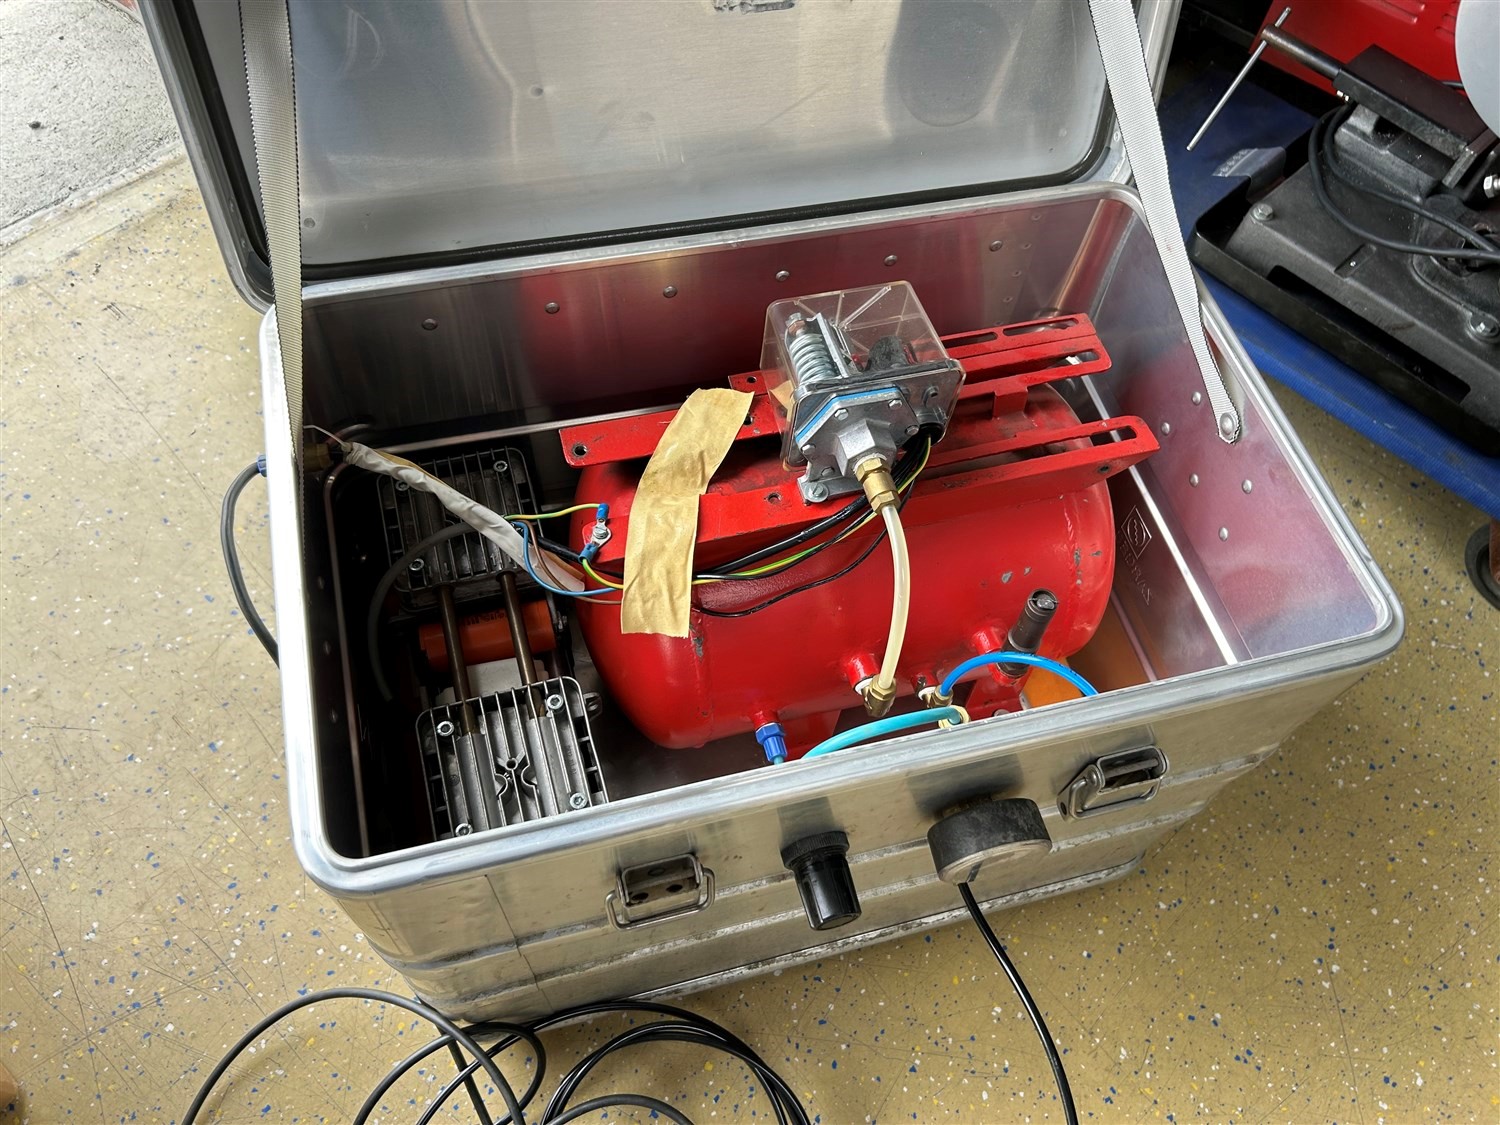 Air compressor in Zarges metal box